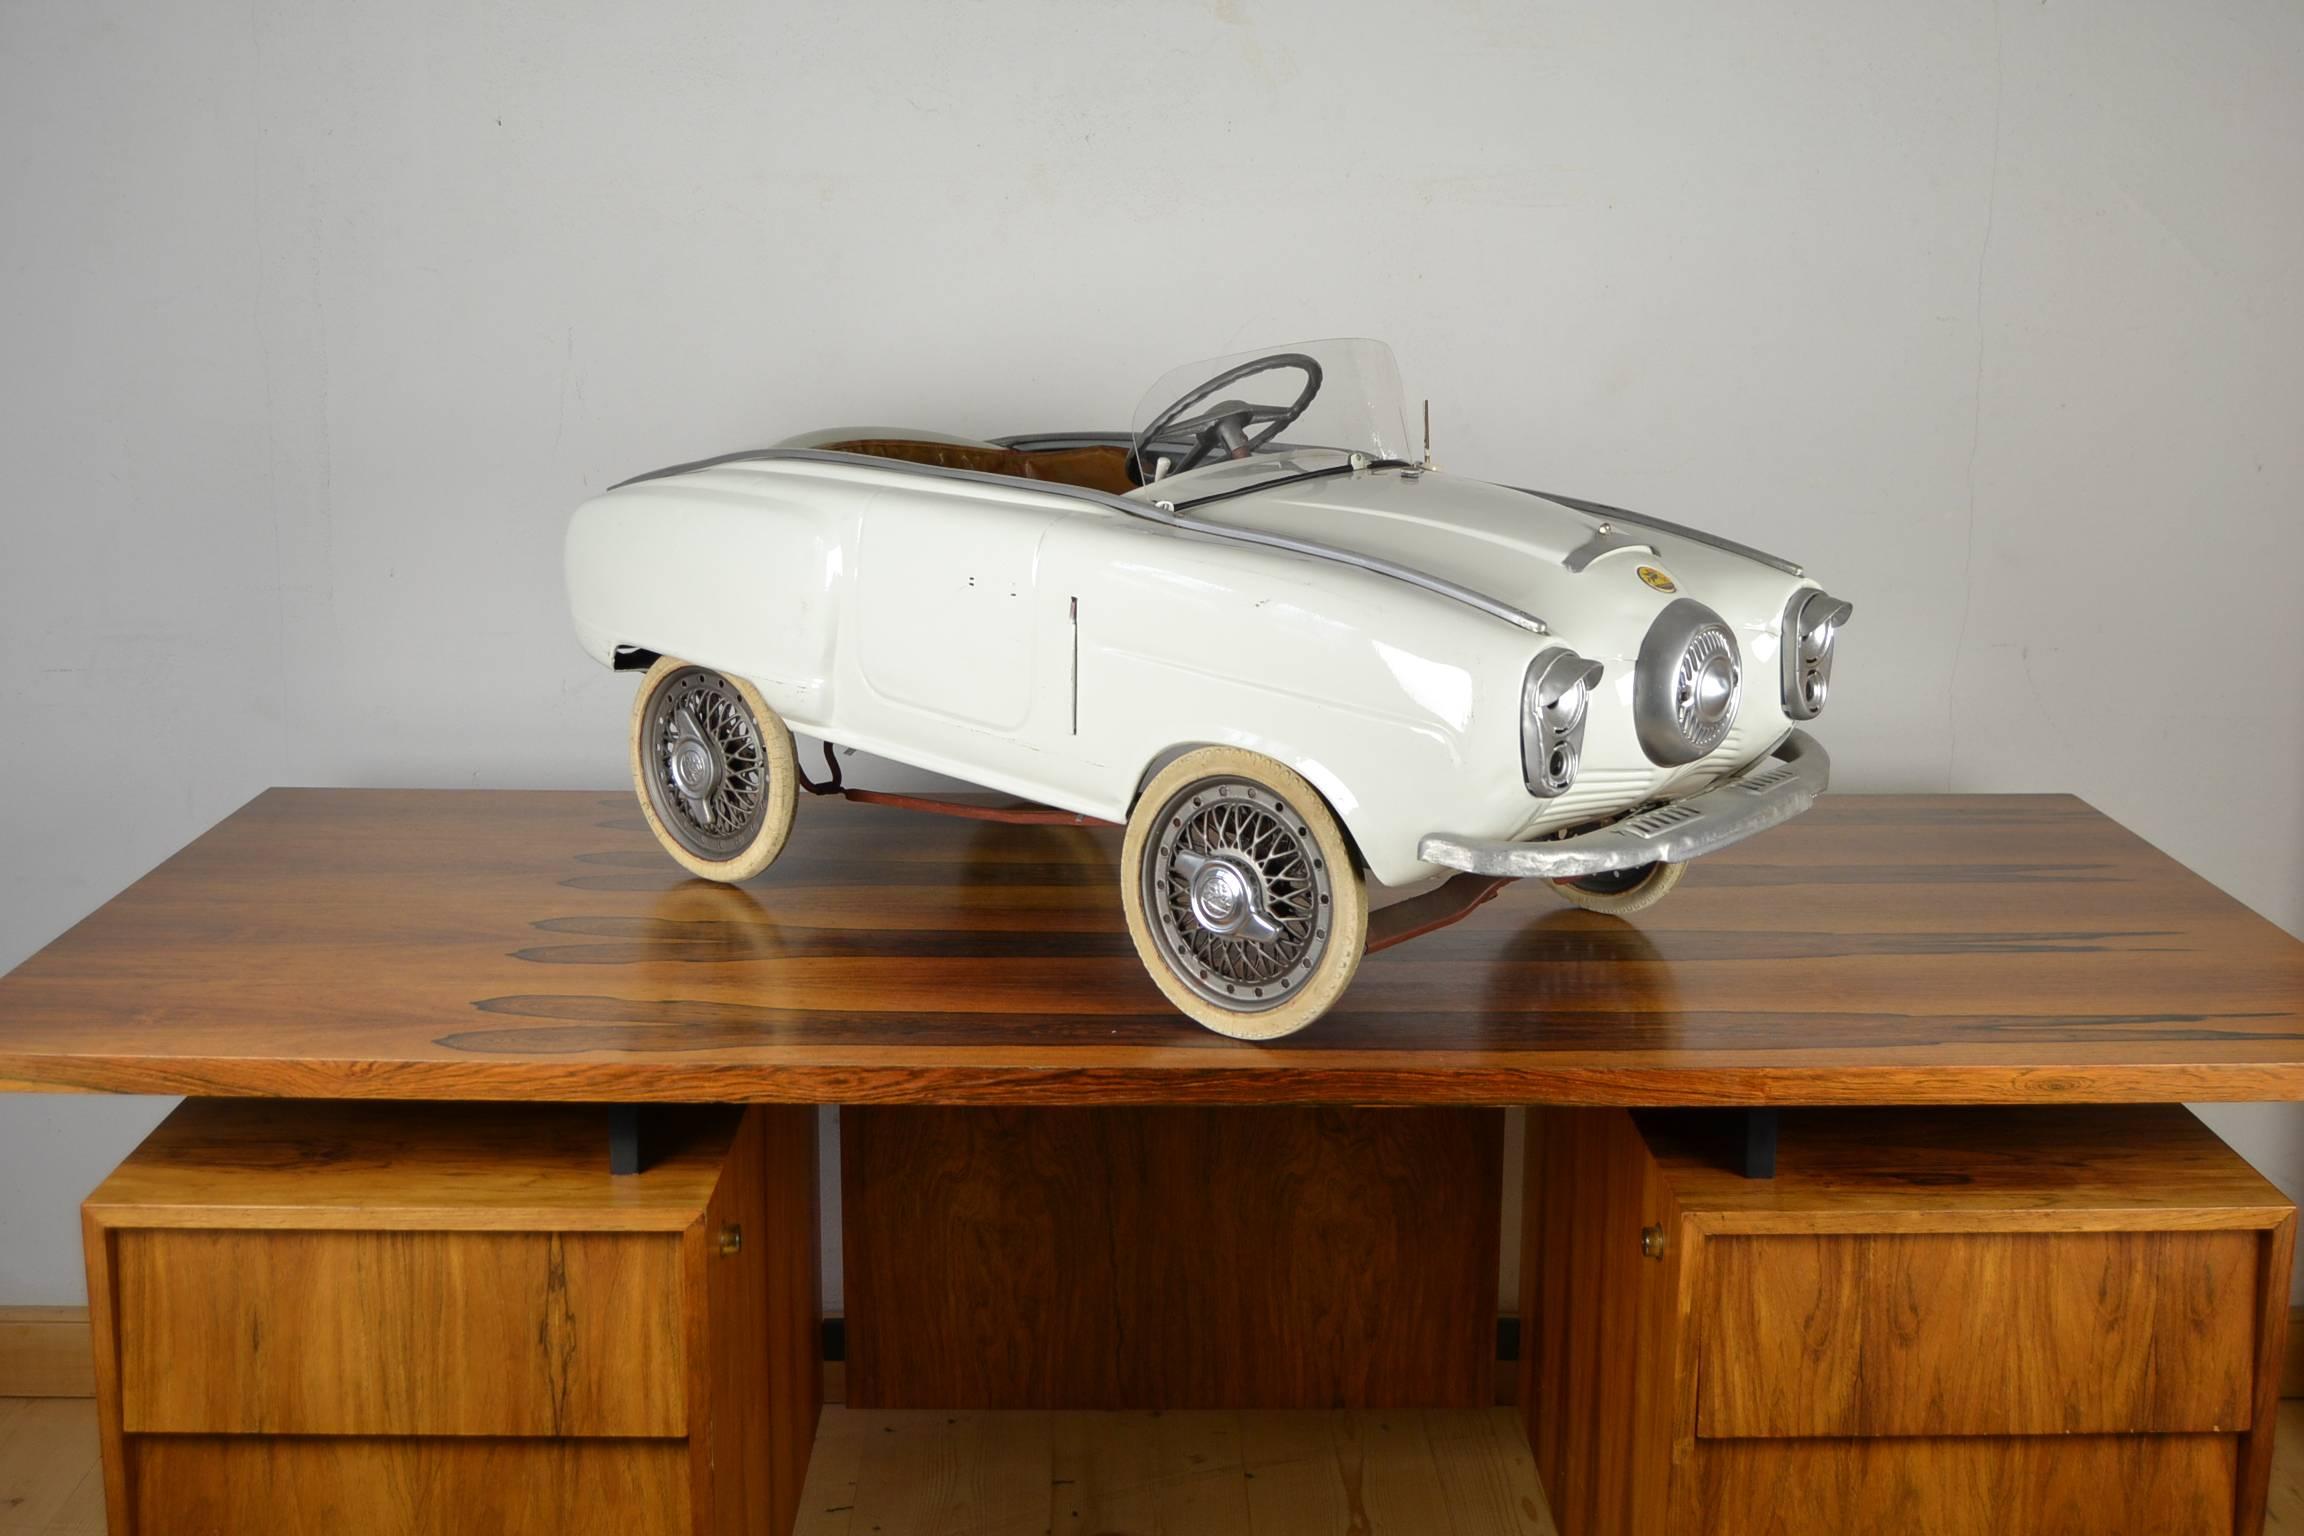 Stylish pedal car by Giordani Bologna Italy, model Grand Prix 503.
Bullet nose, made in Italy, 1961.
Suberb child's car attributed to the awesome USA Studebaker bullet nose car from the late 1950s-early 1960s.
Charming white repainted metal